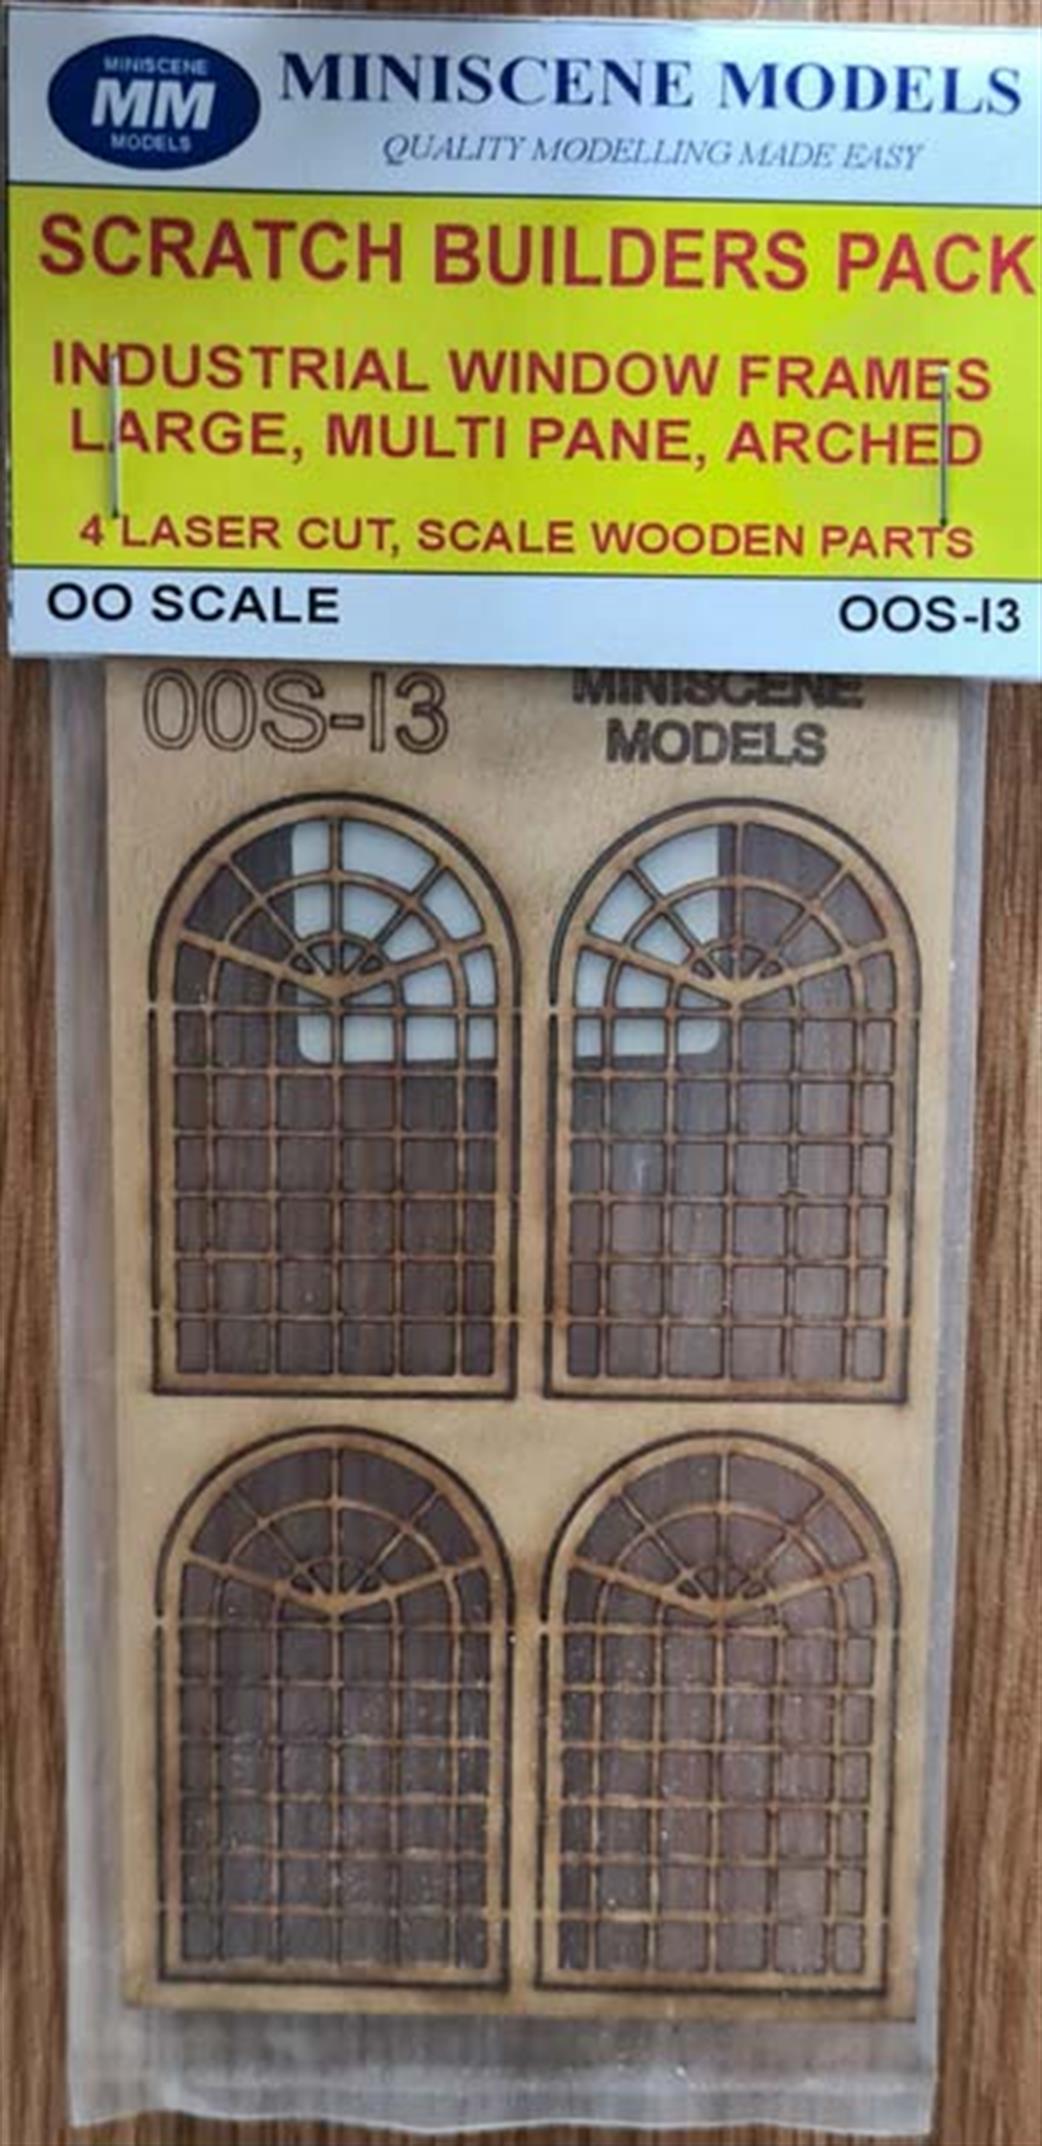 Ancorton Models OO OOS-13 Large, Multi-Pane, Arched Window Frames